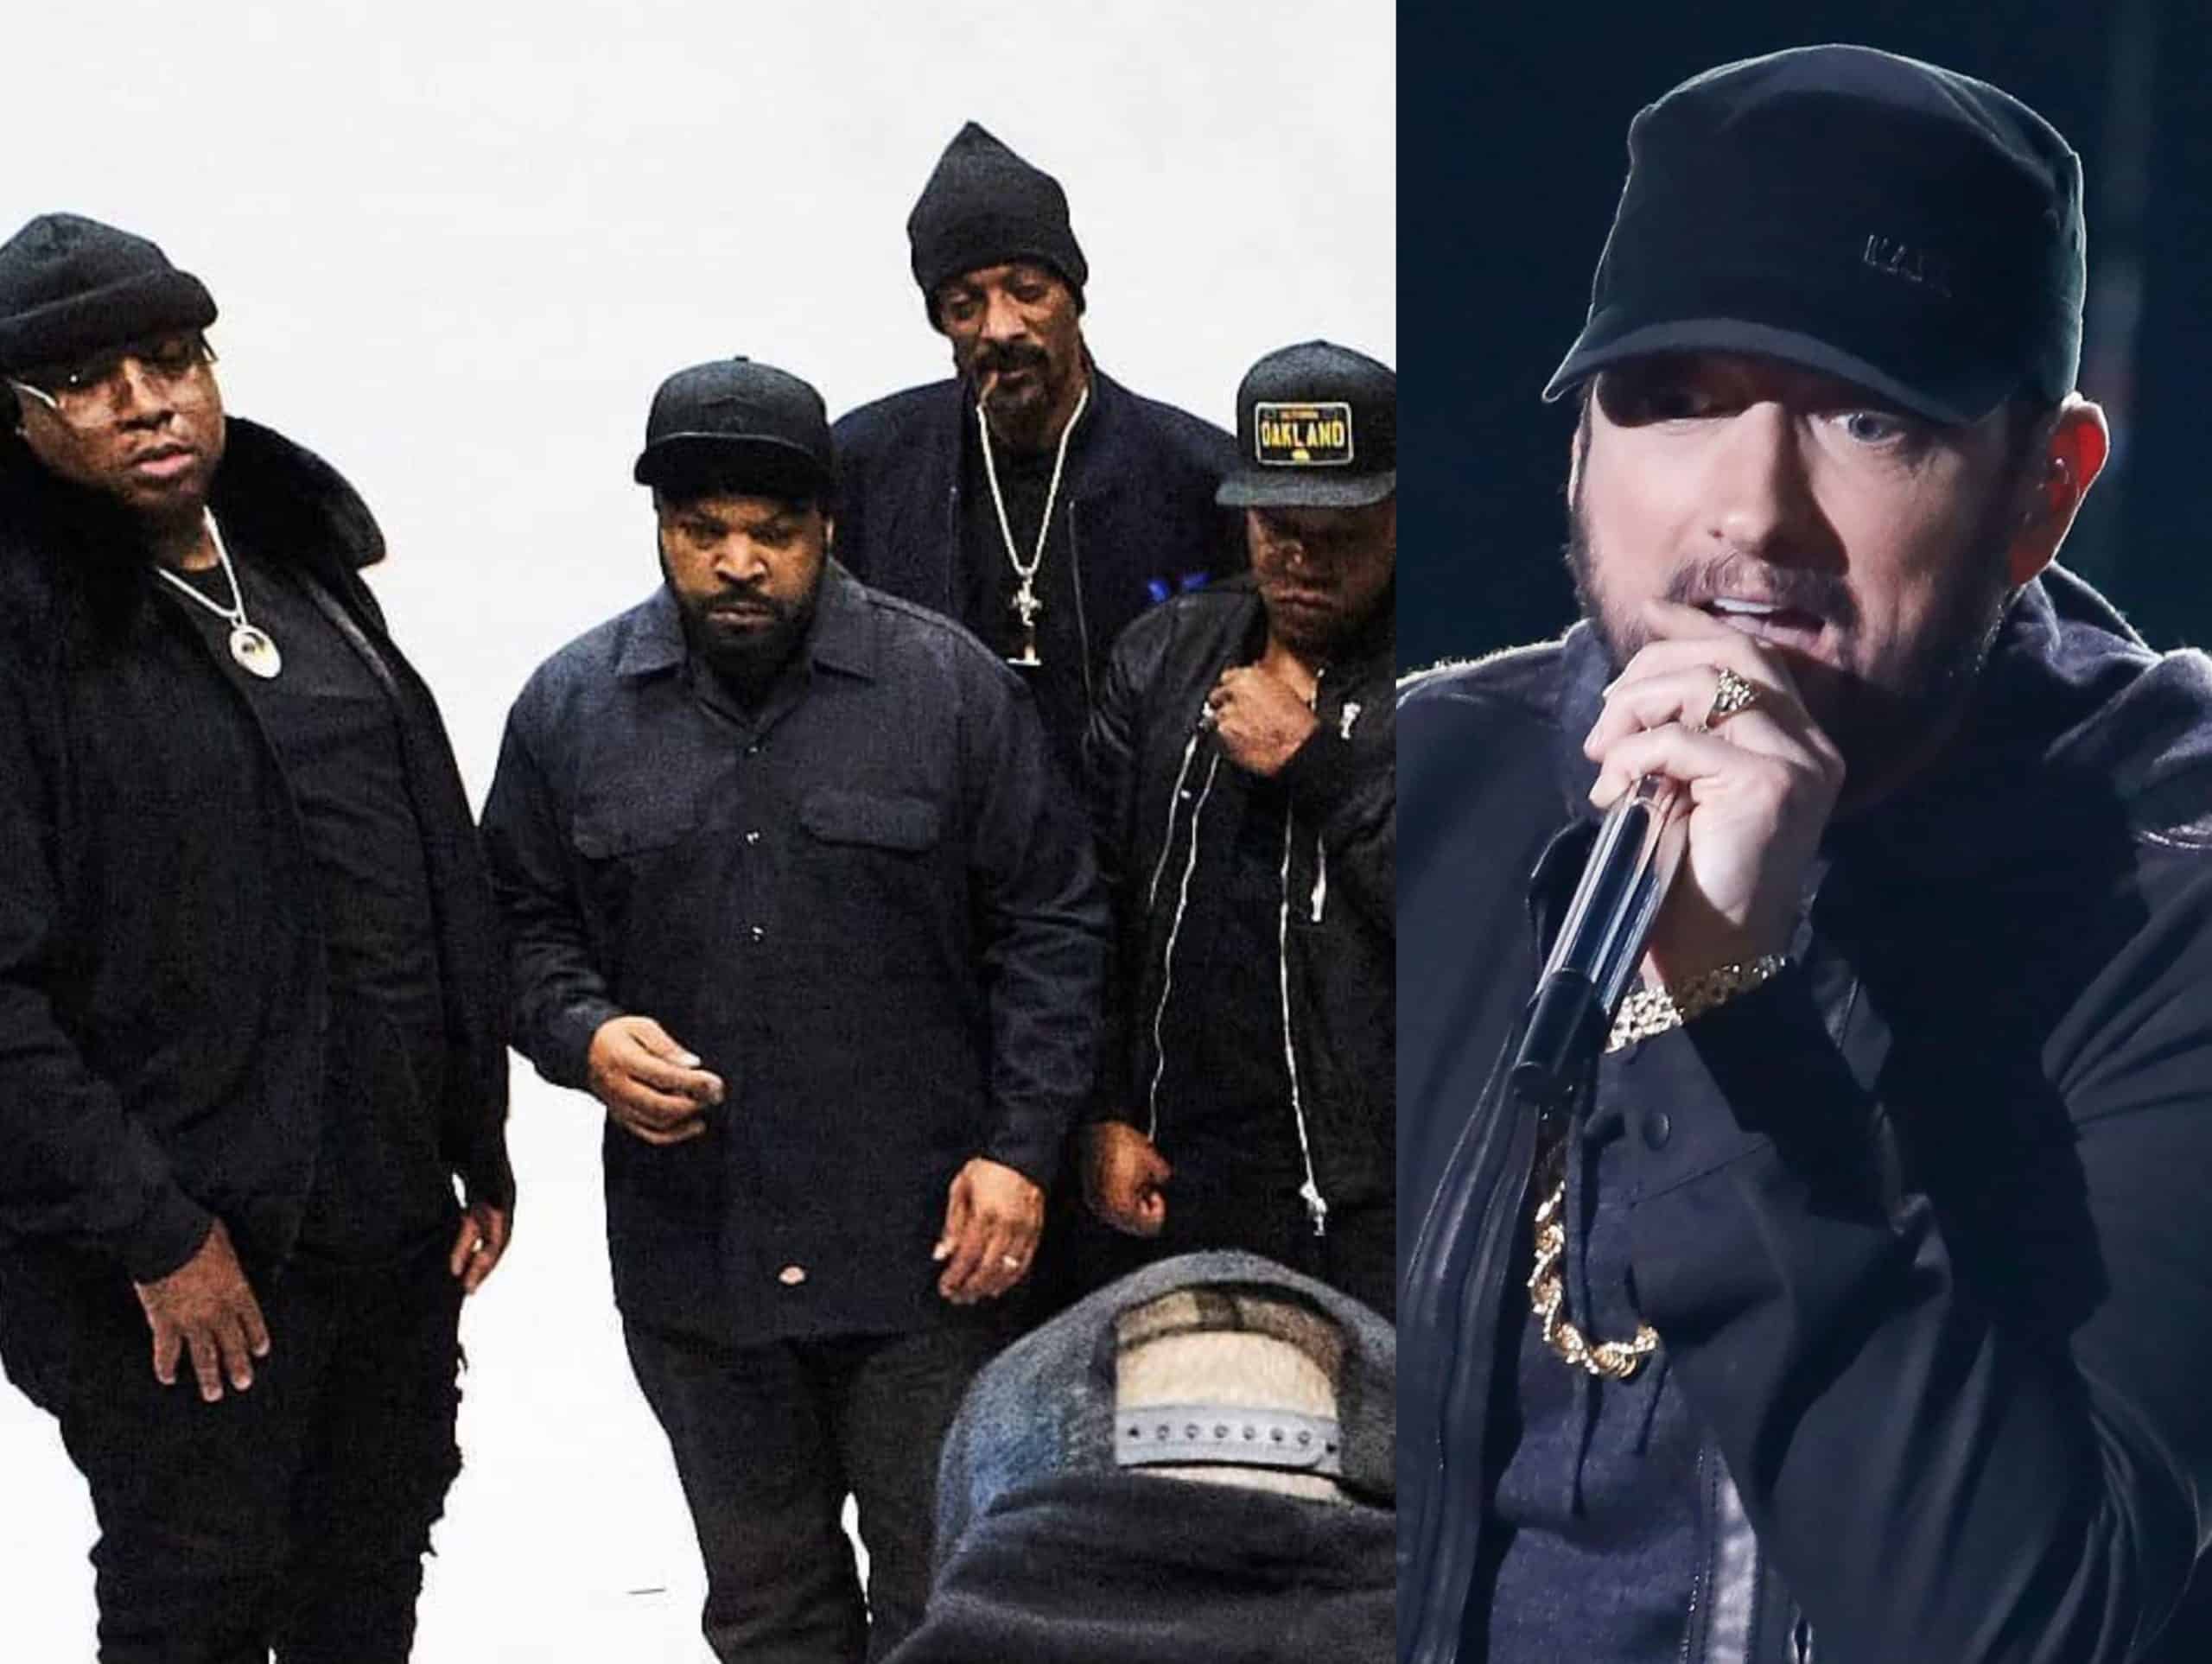 Eminem Hints At Cameo In New Music Video of Snoop Dogg, E-40, Ice Cube & Too Short